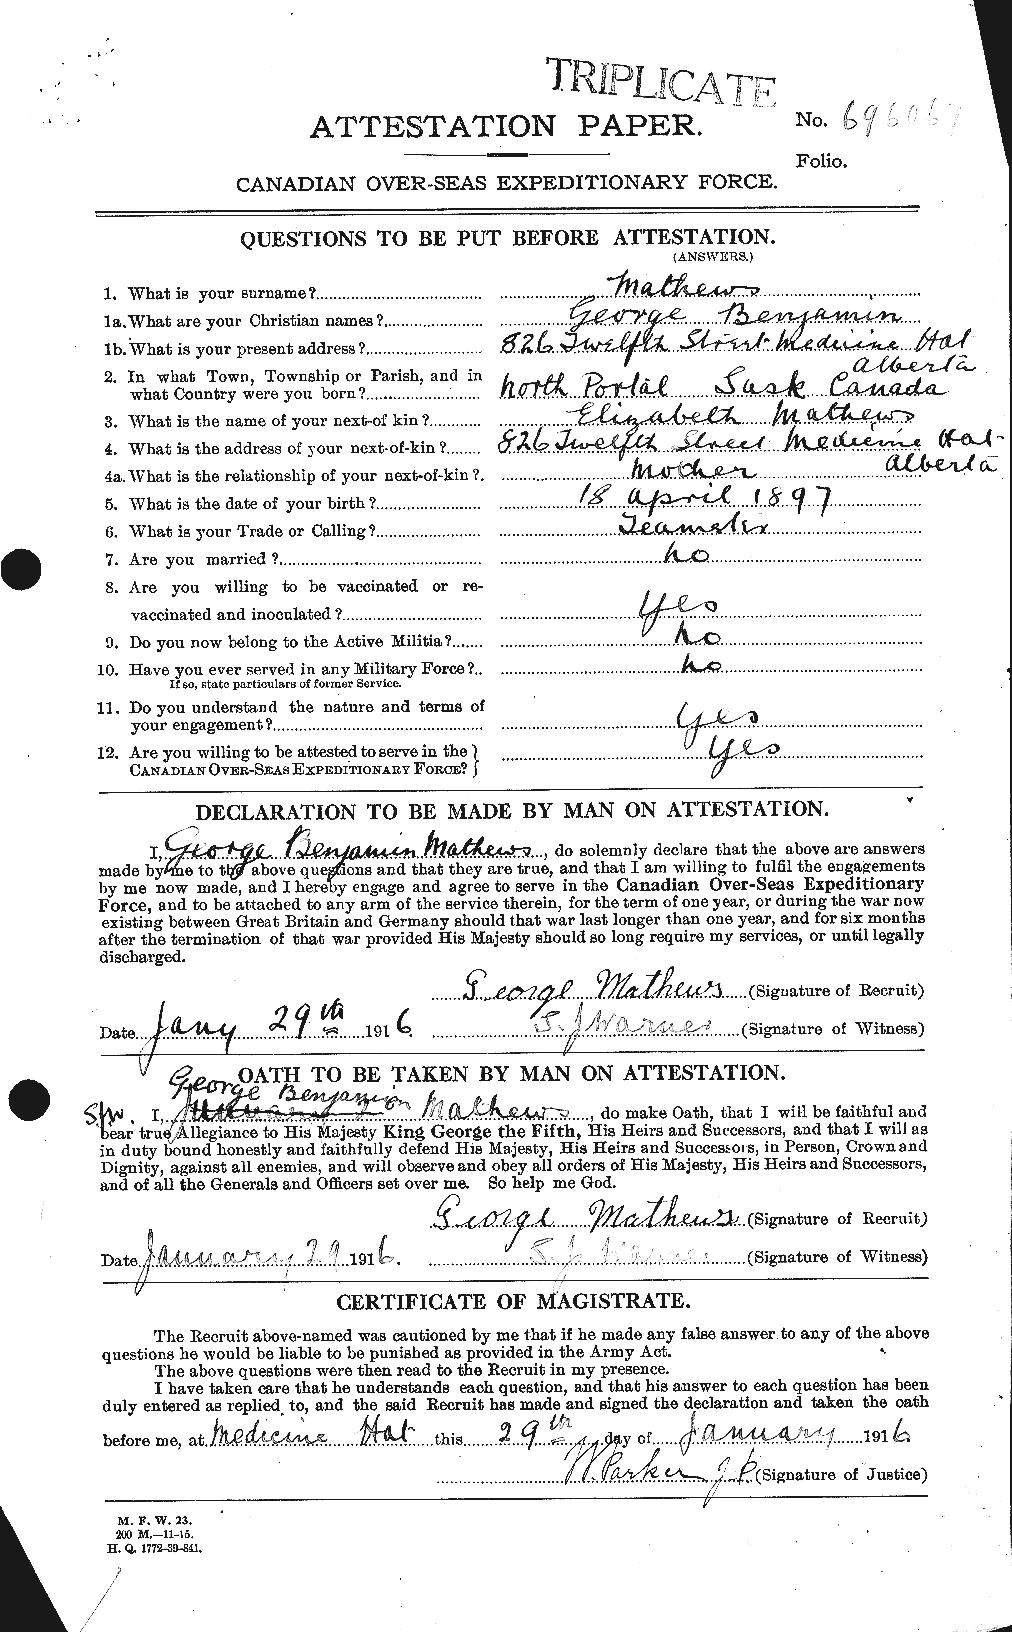 Personnel Records of the First World War - CEF 489965a